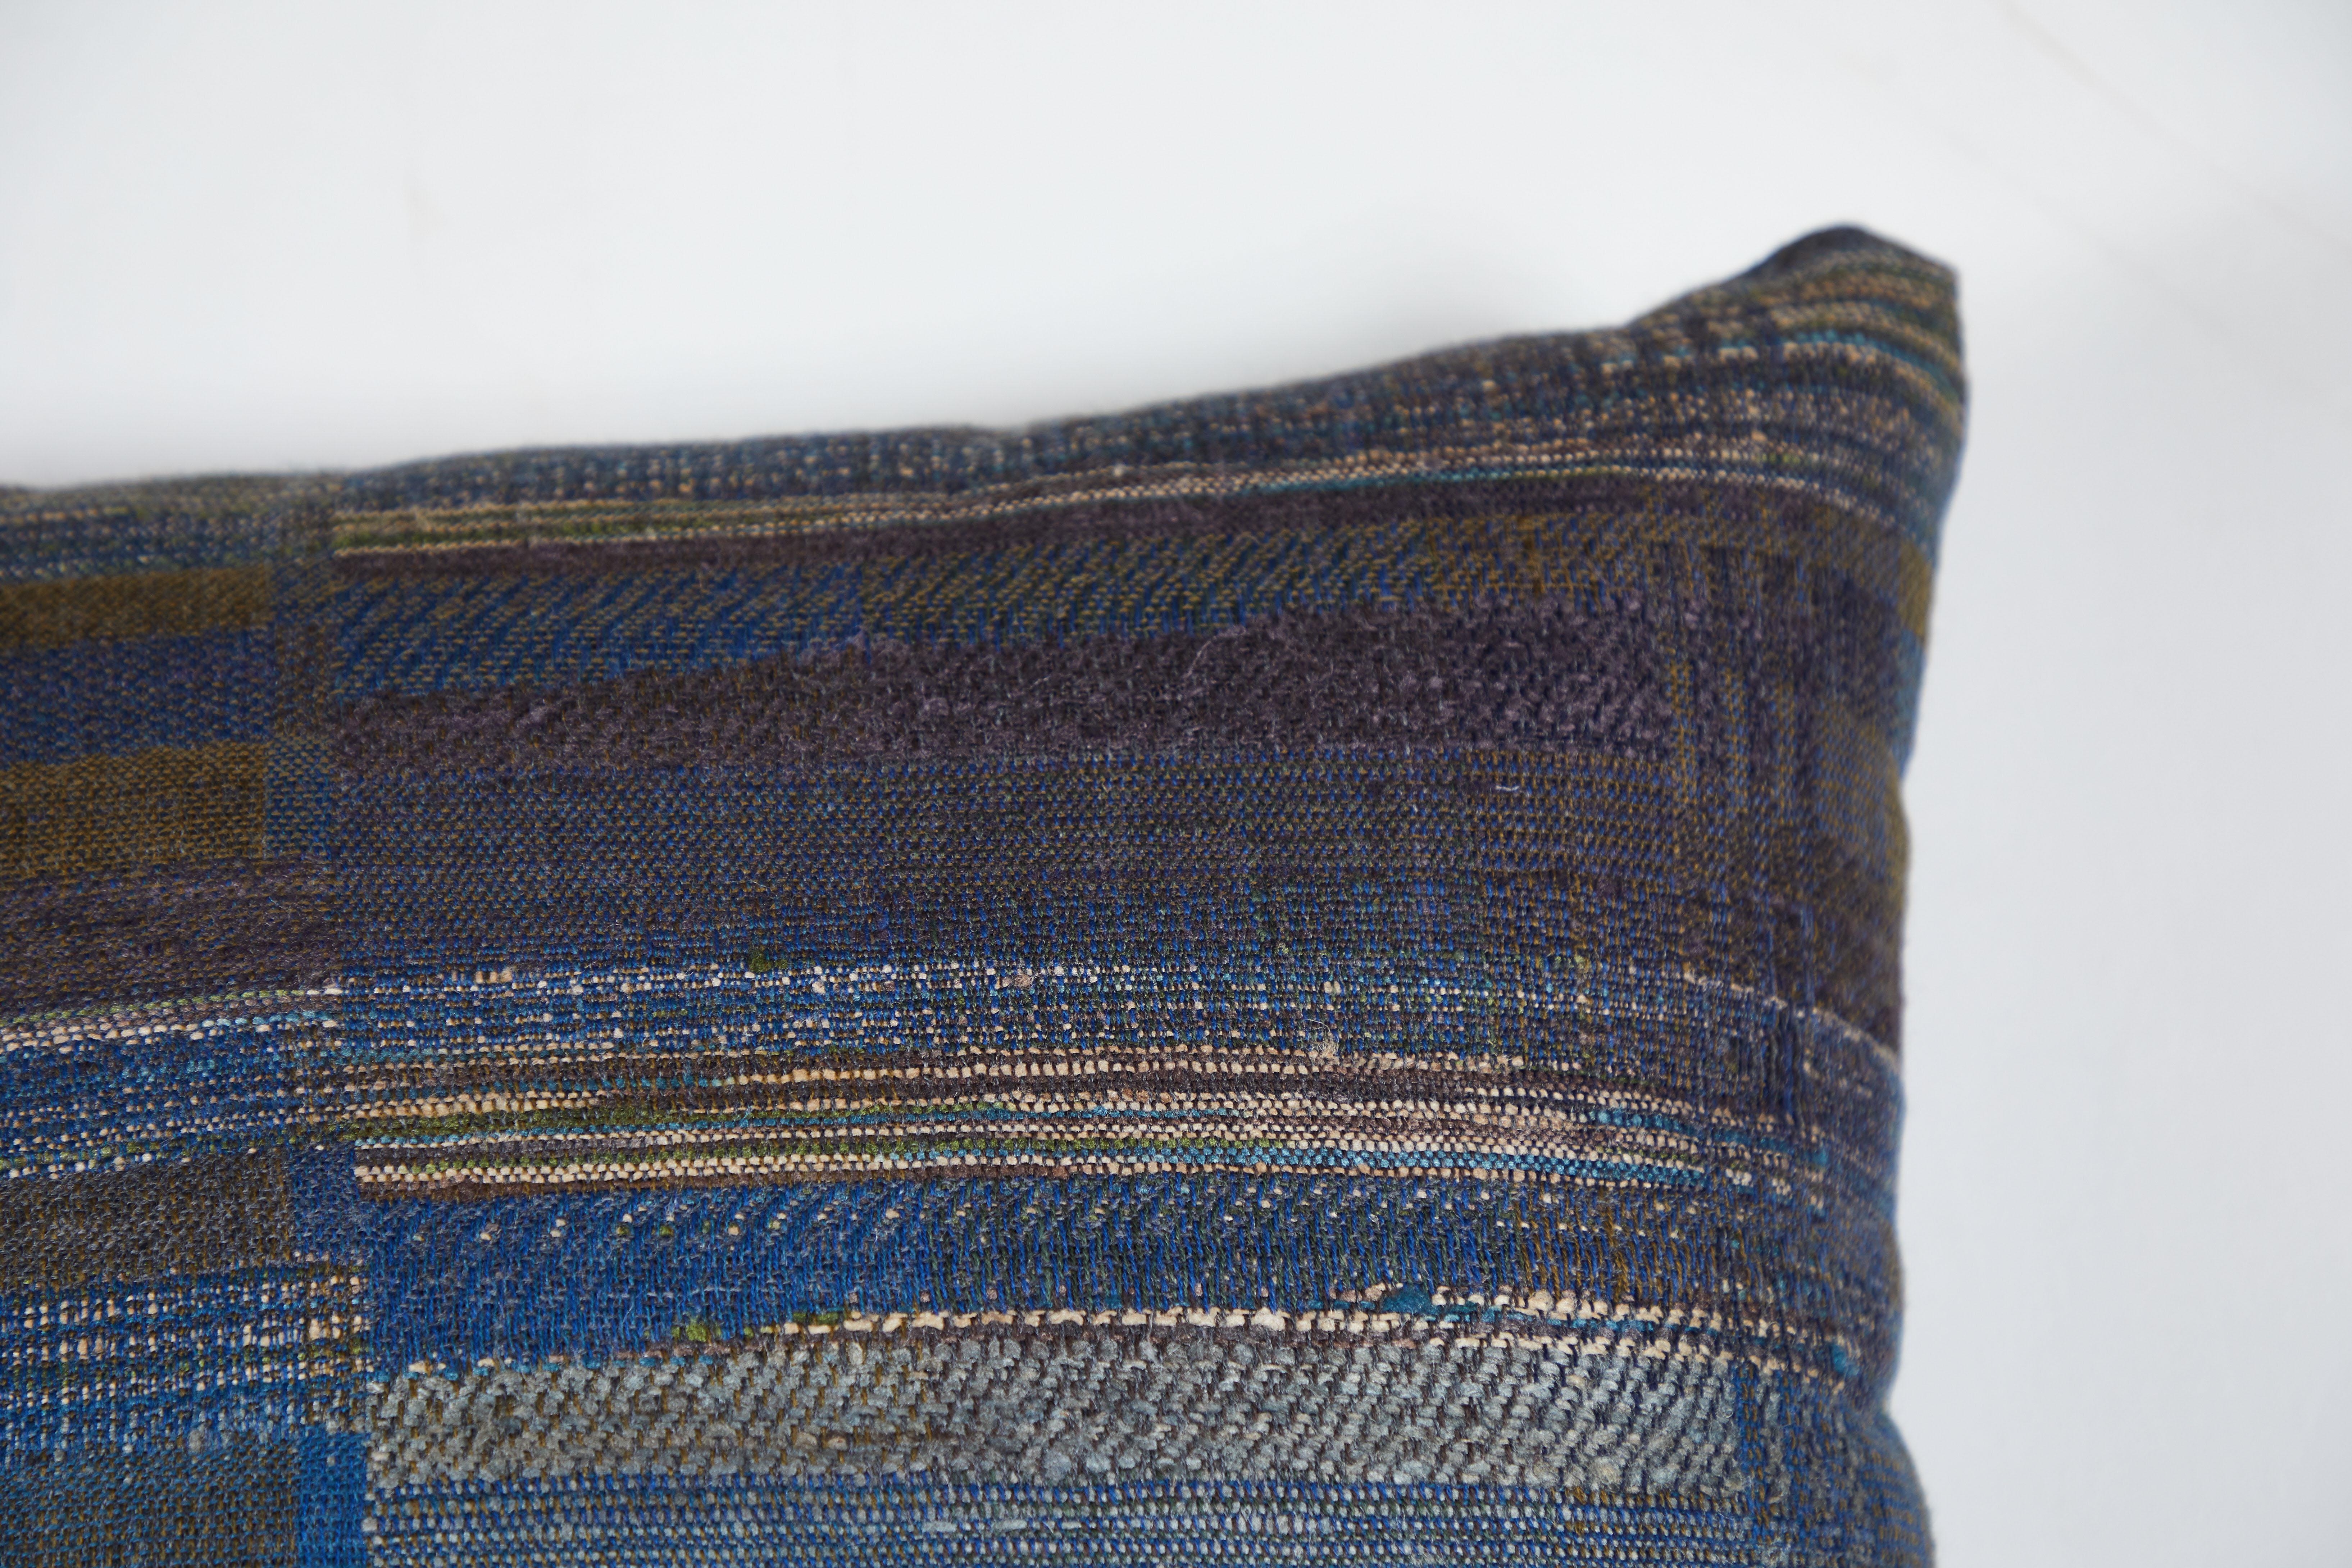 A contemporary line of cushions, pillows, throws, bedcovers, bedspreads and yardage handwoven in India on antique Jacquard looms. Hand spun wool, cotton, linen, and raw silk give the textiles an appealing uneven quality. Sizes vary slightly.
The